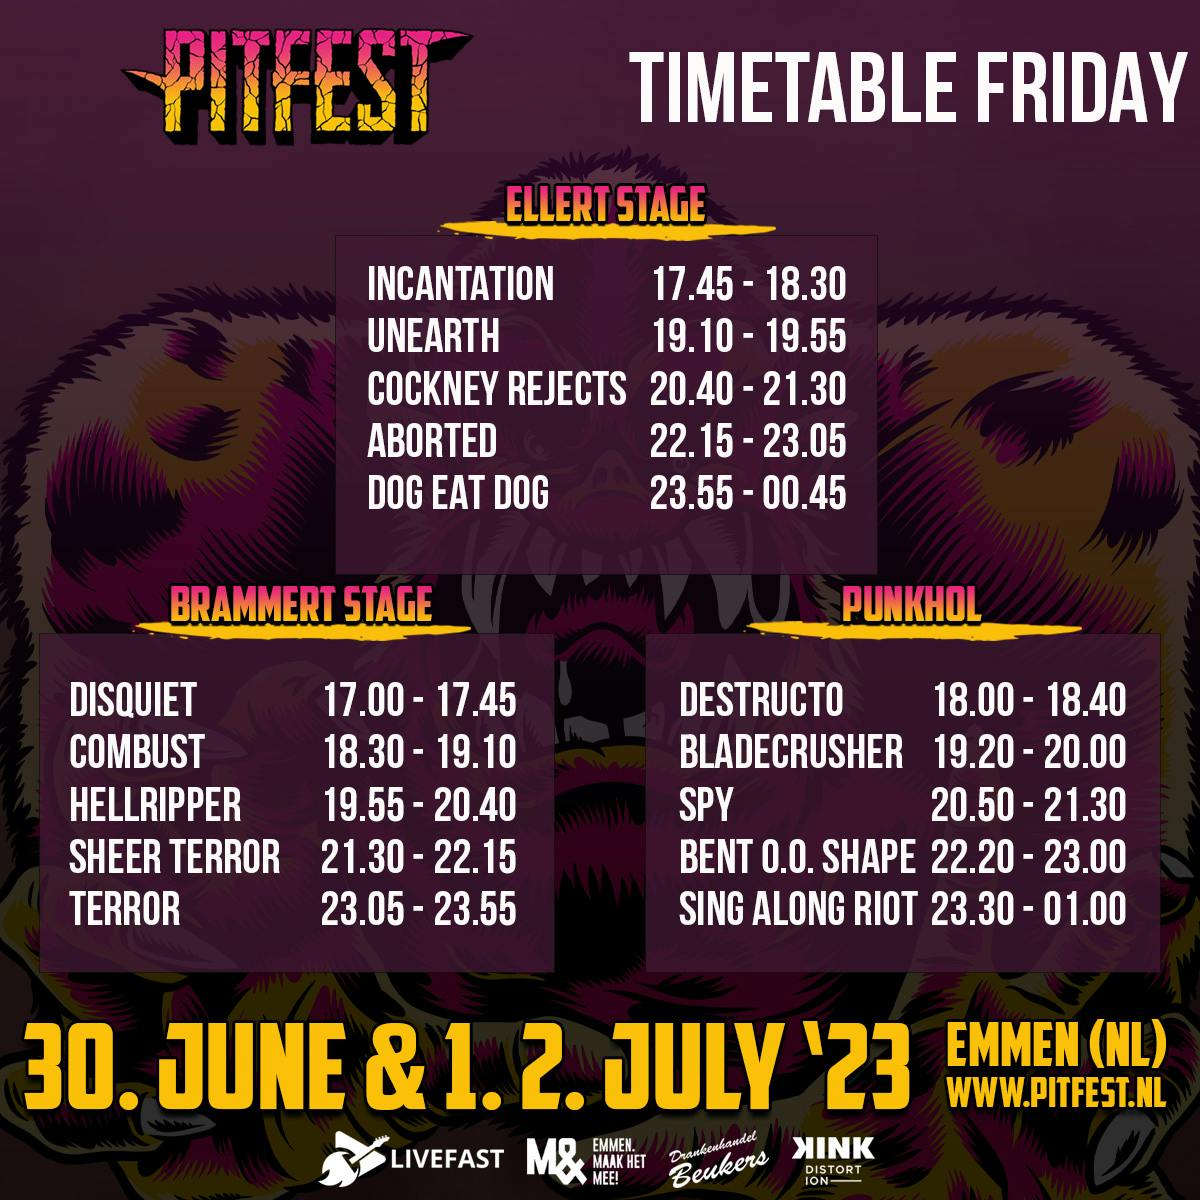 Timetable Friday